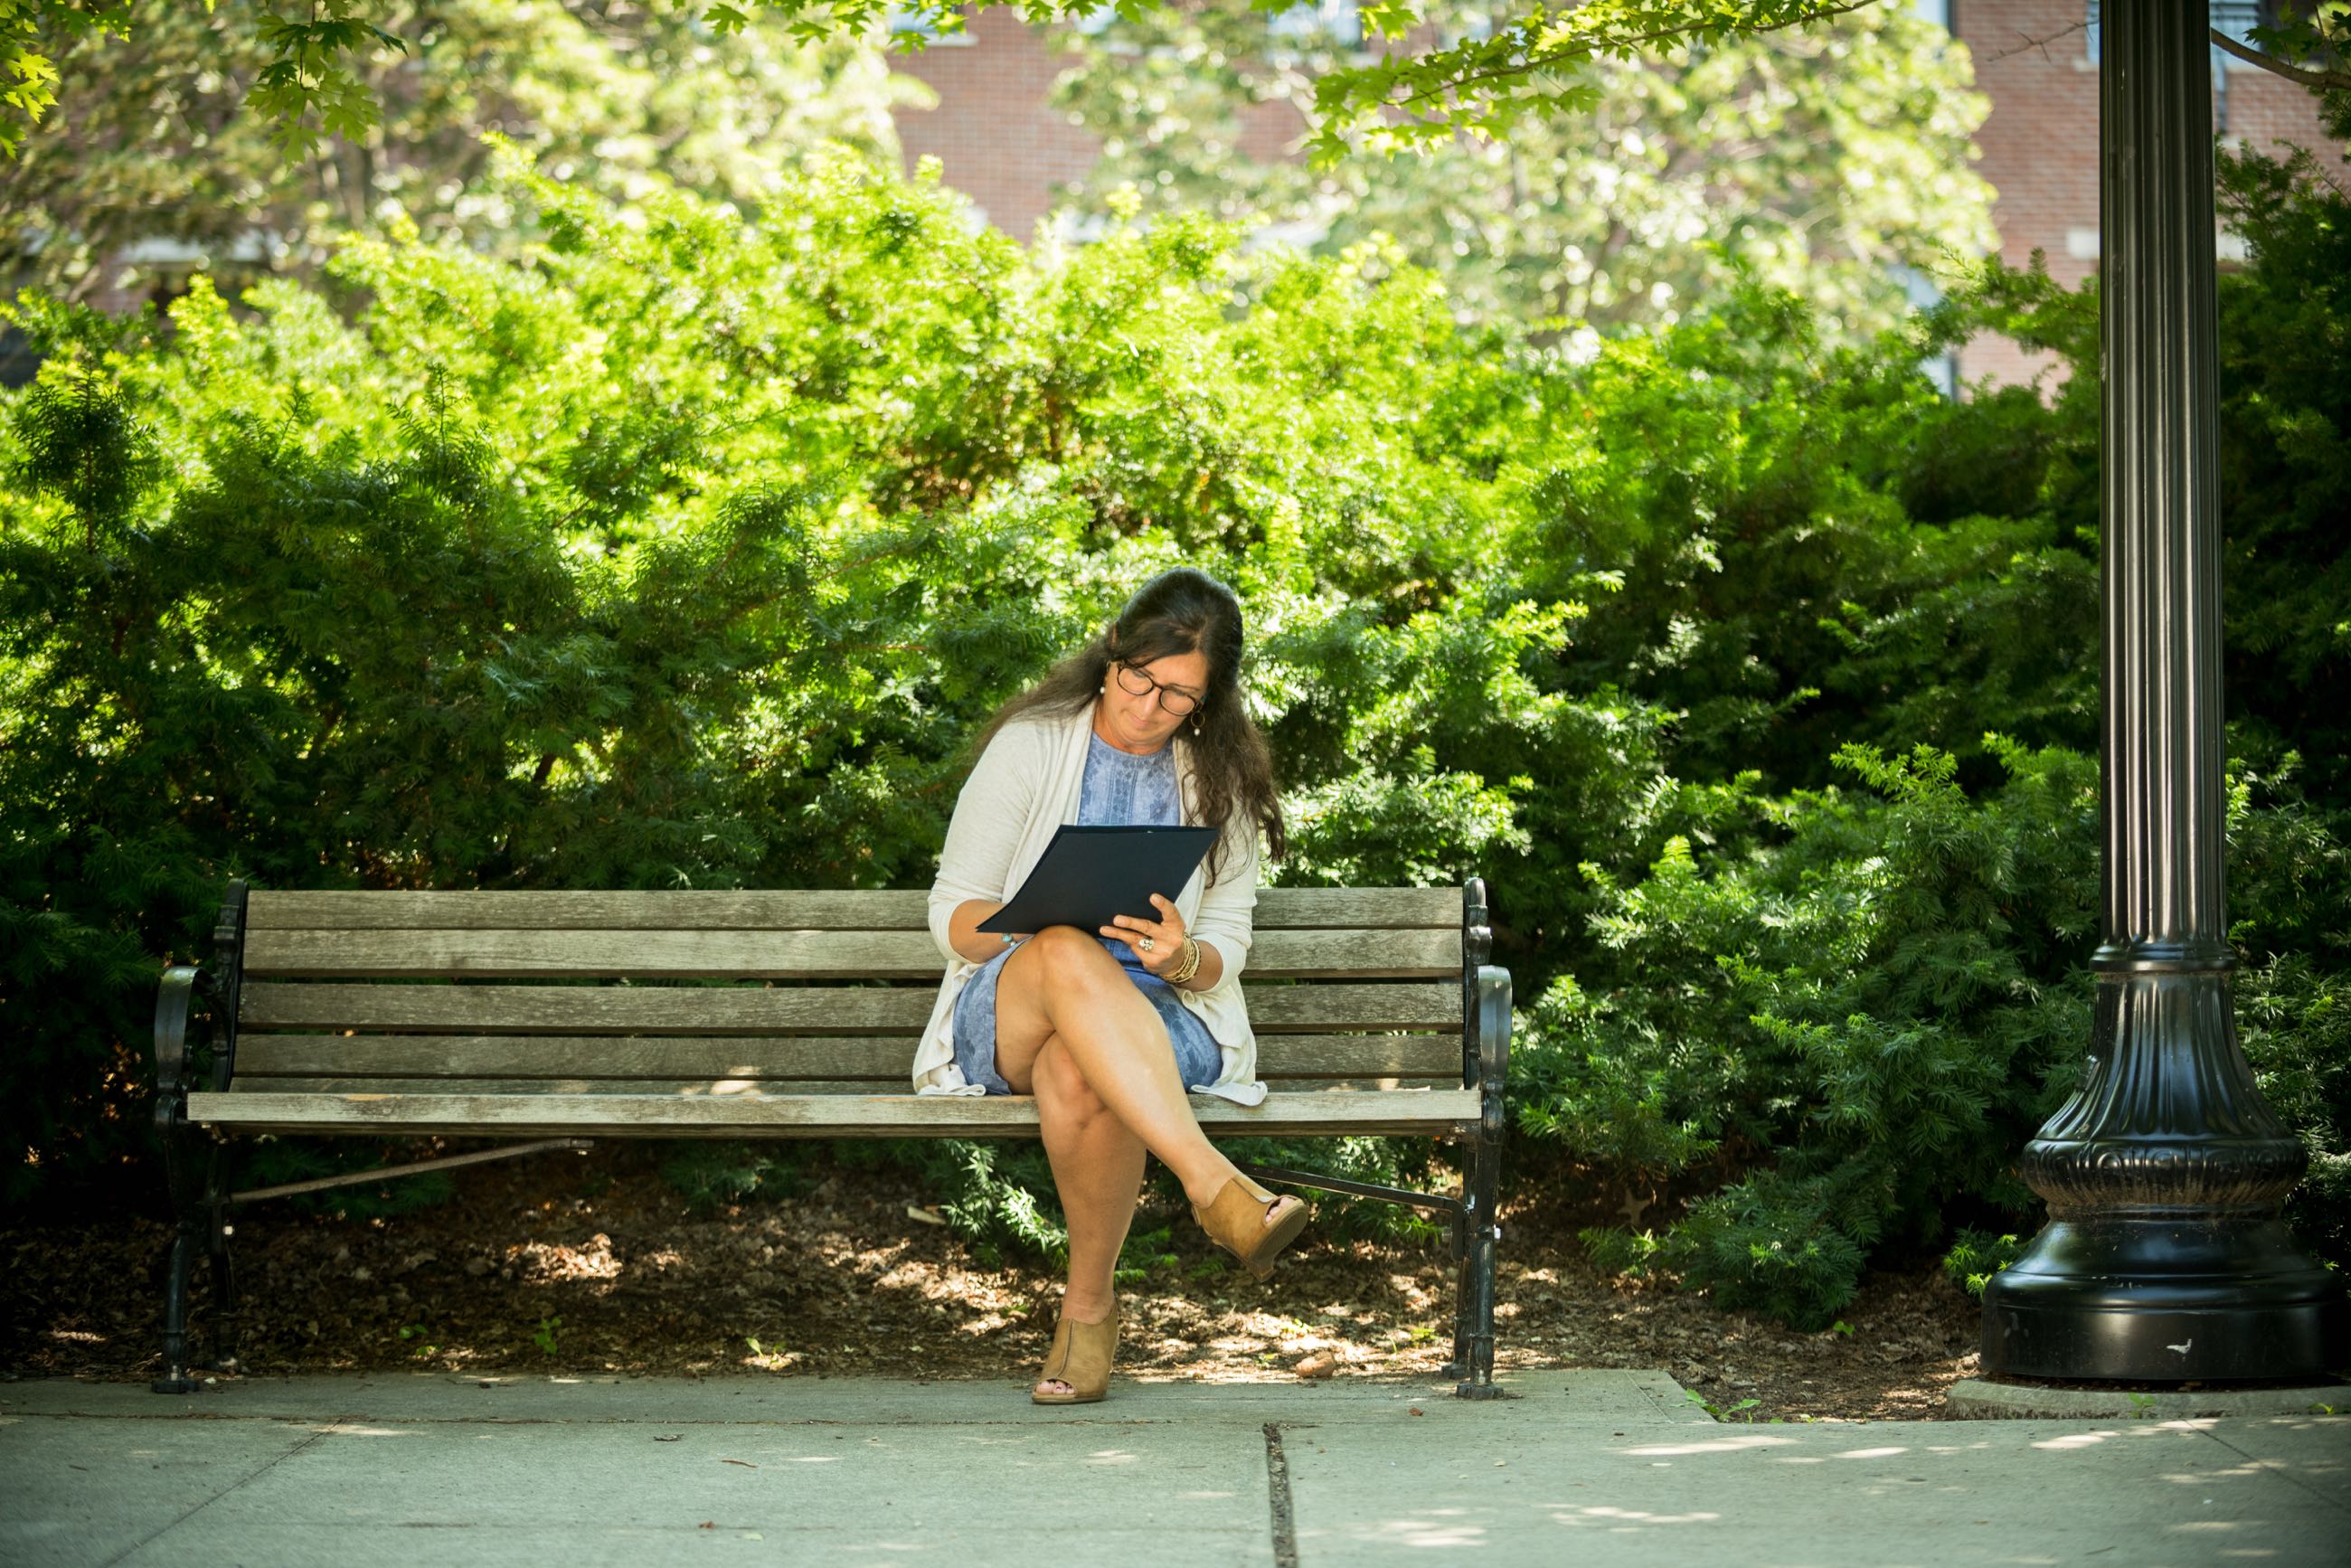 Student Working On Assignments On a Bench